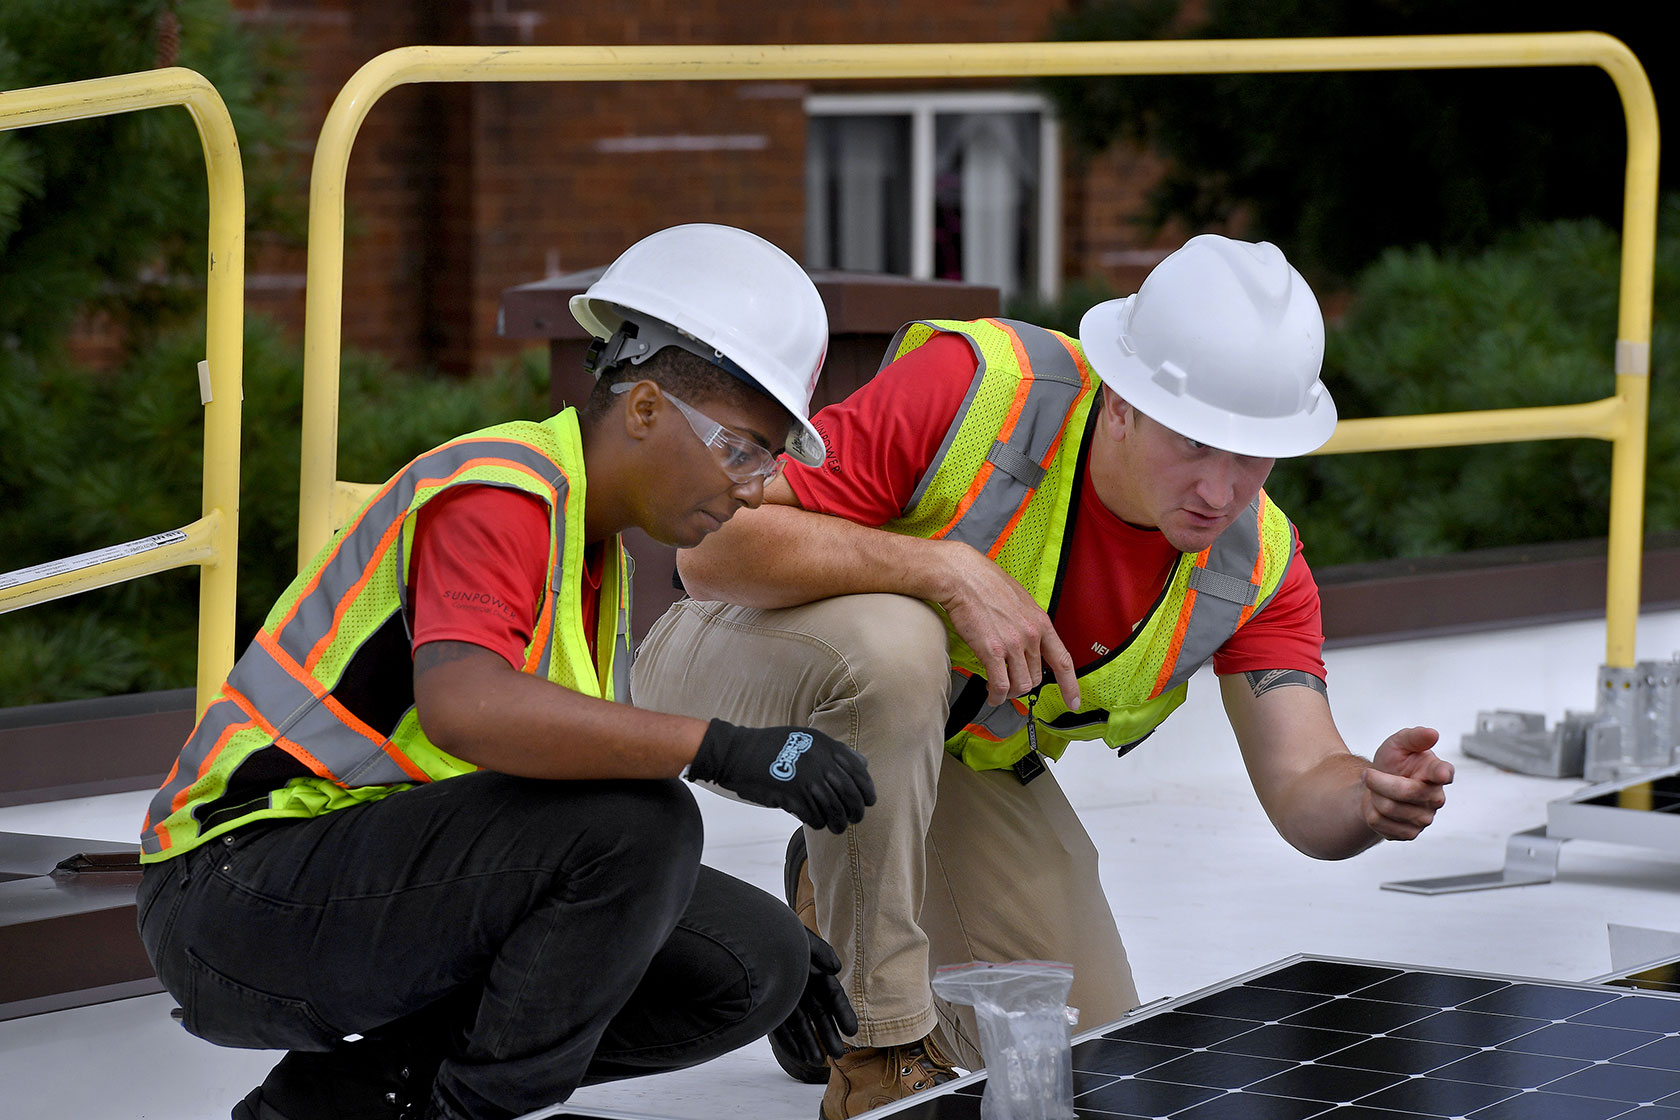 Photo shows two construction workers kneeling over a solar panel on a roof.